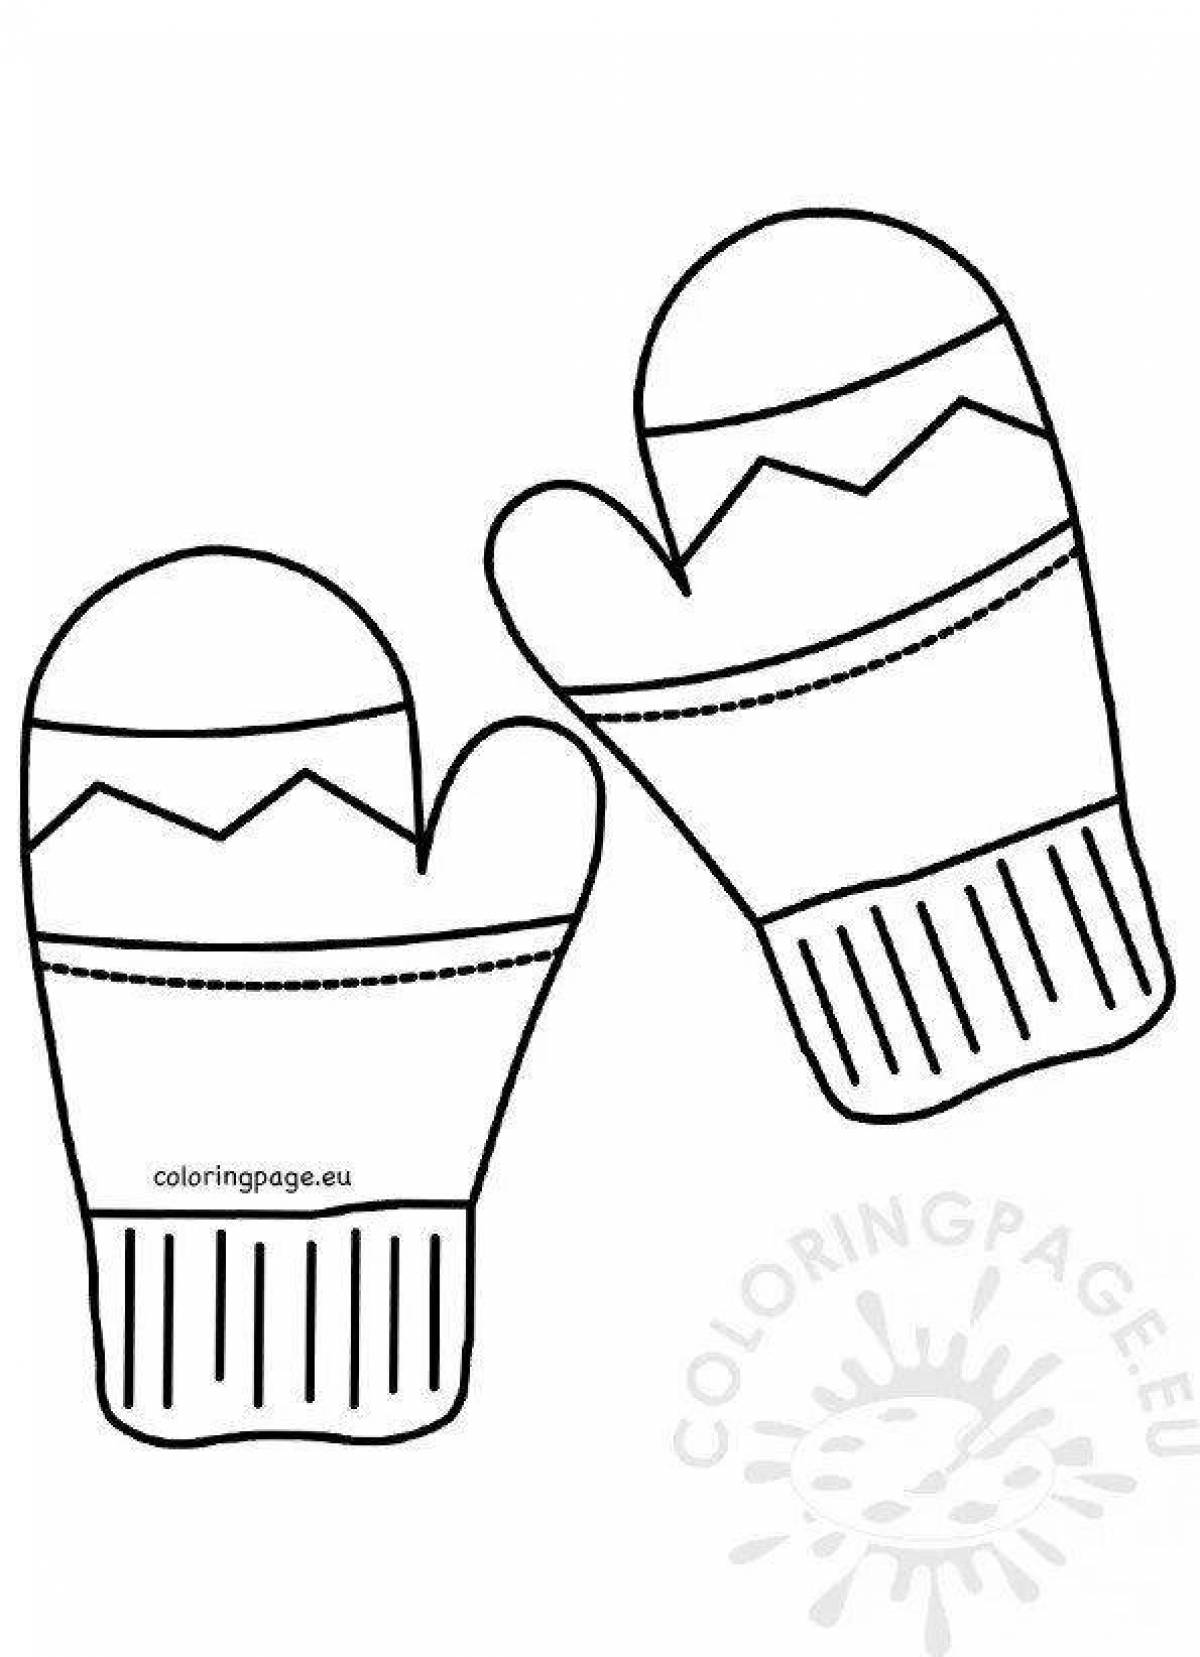 Fun mittens coloring book for 2-3 year olds